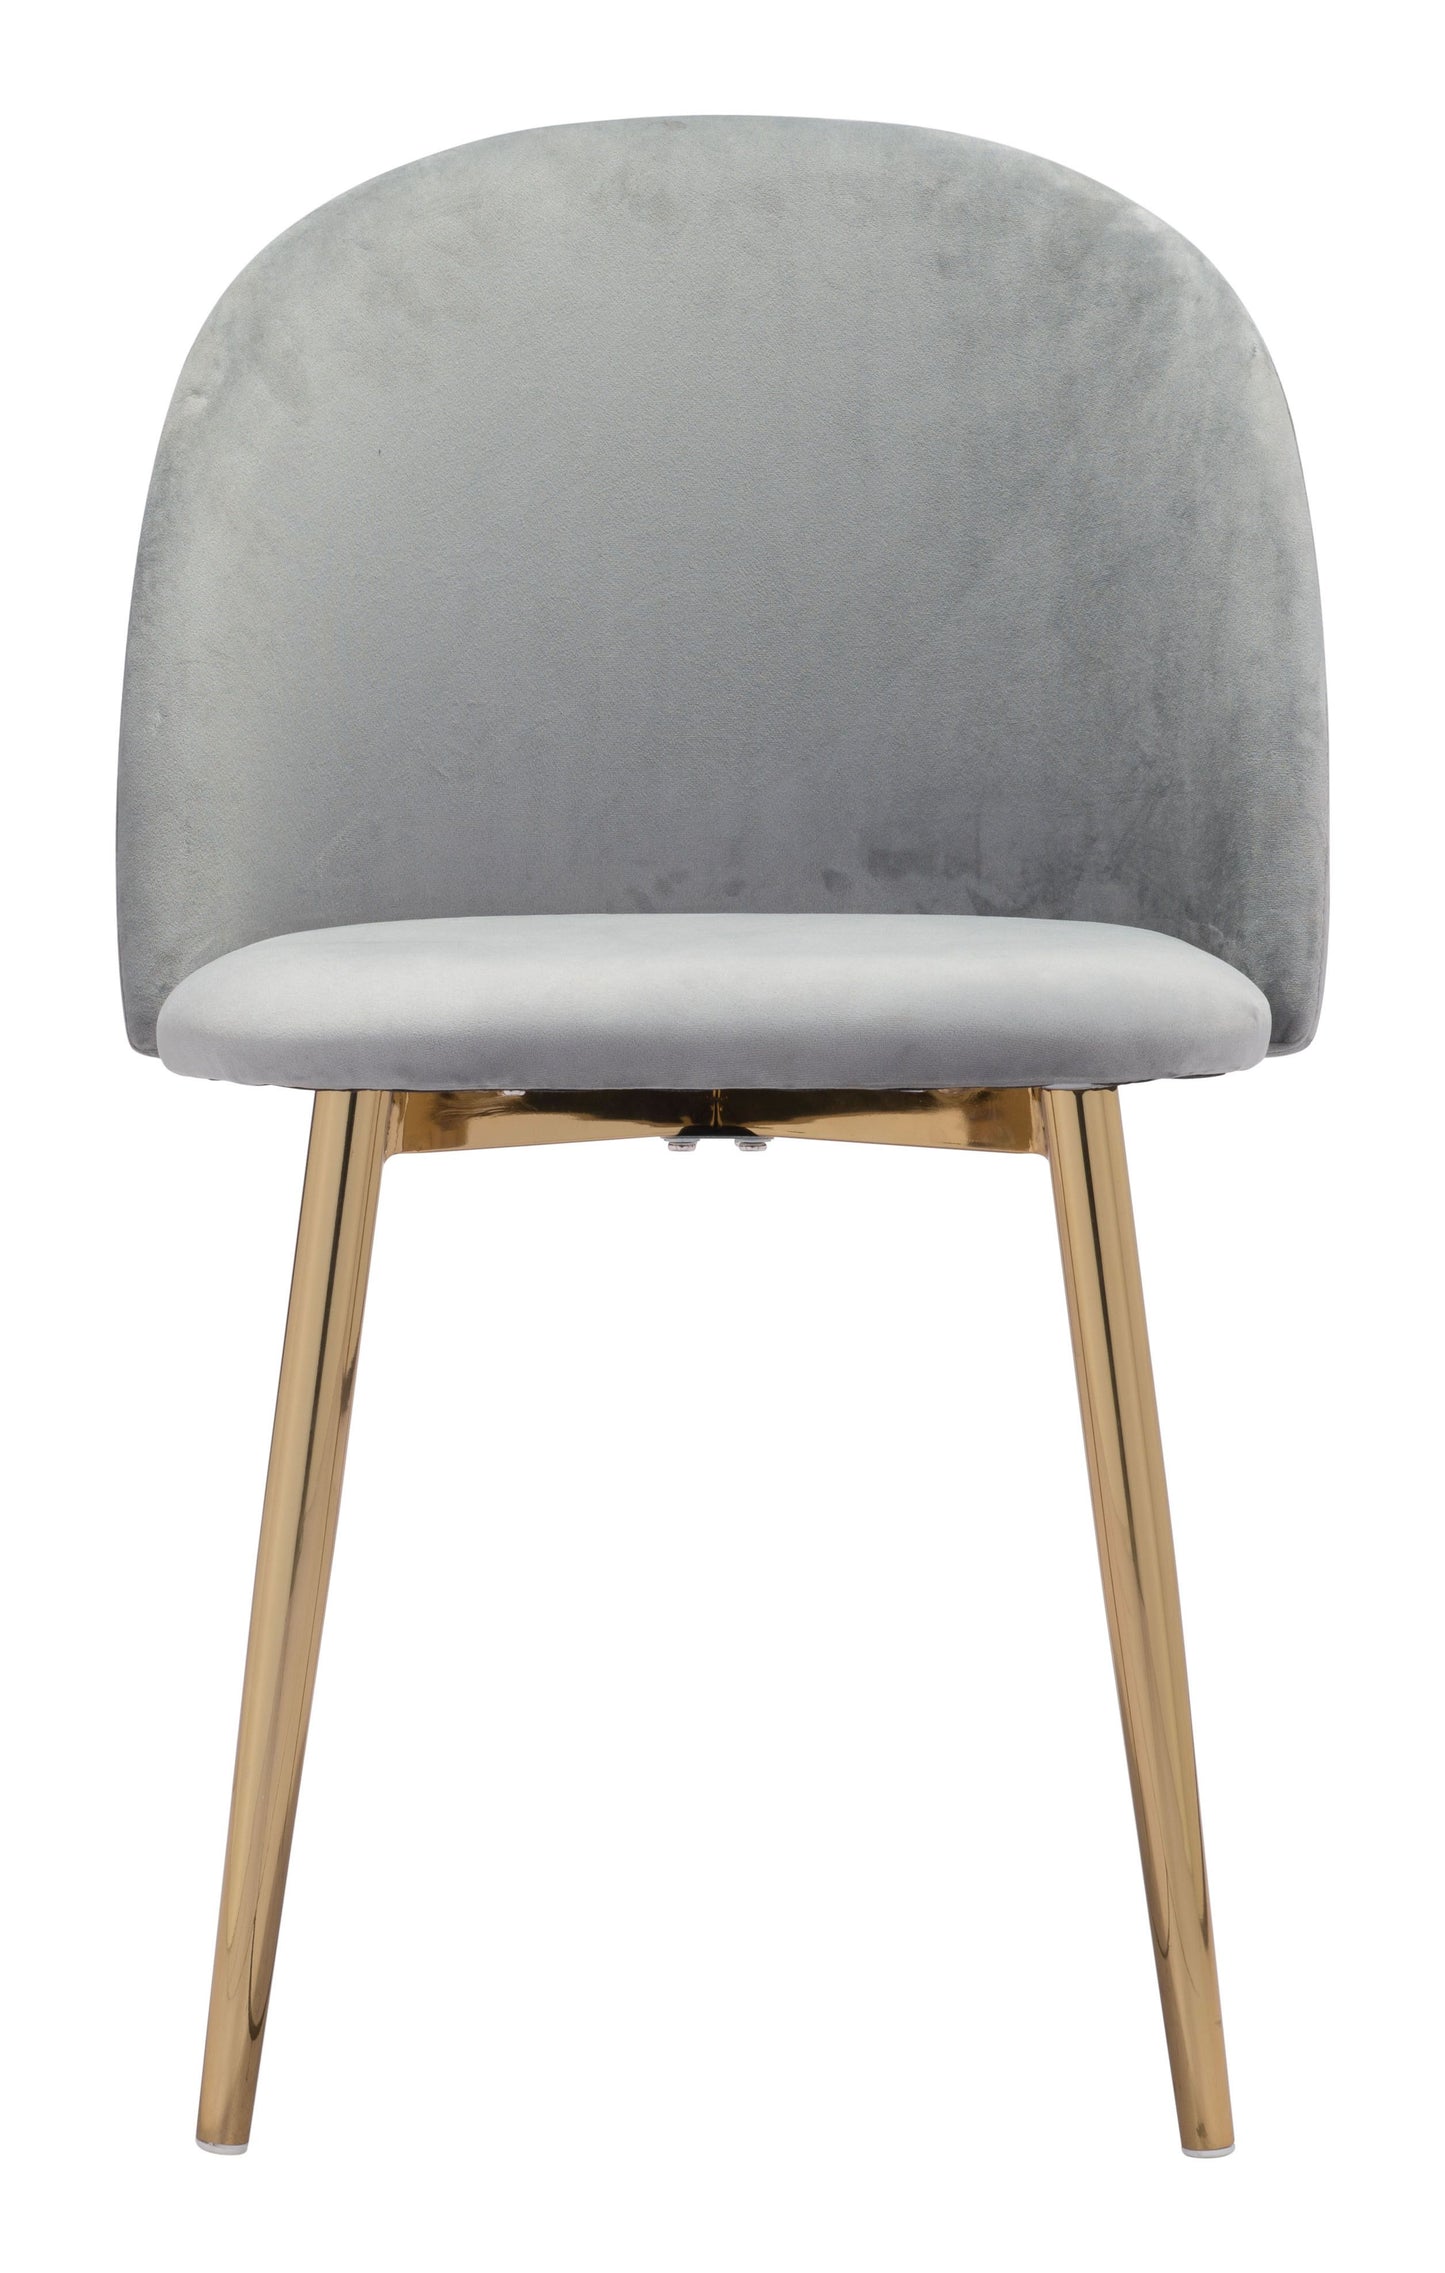 Cozy Dining Chair Gray